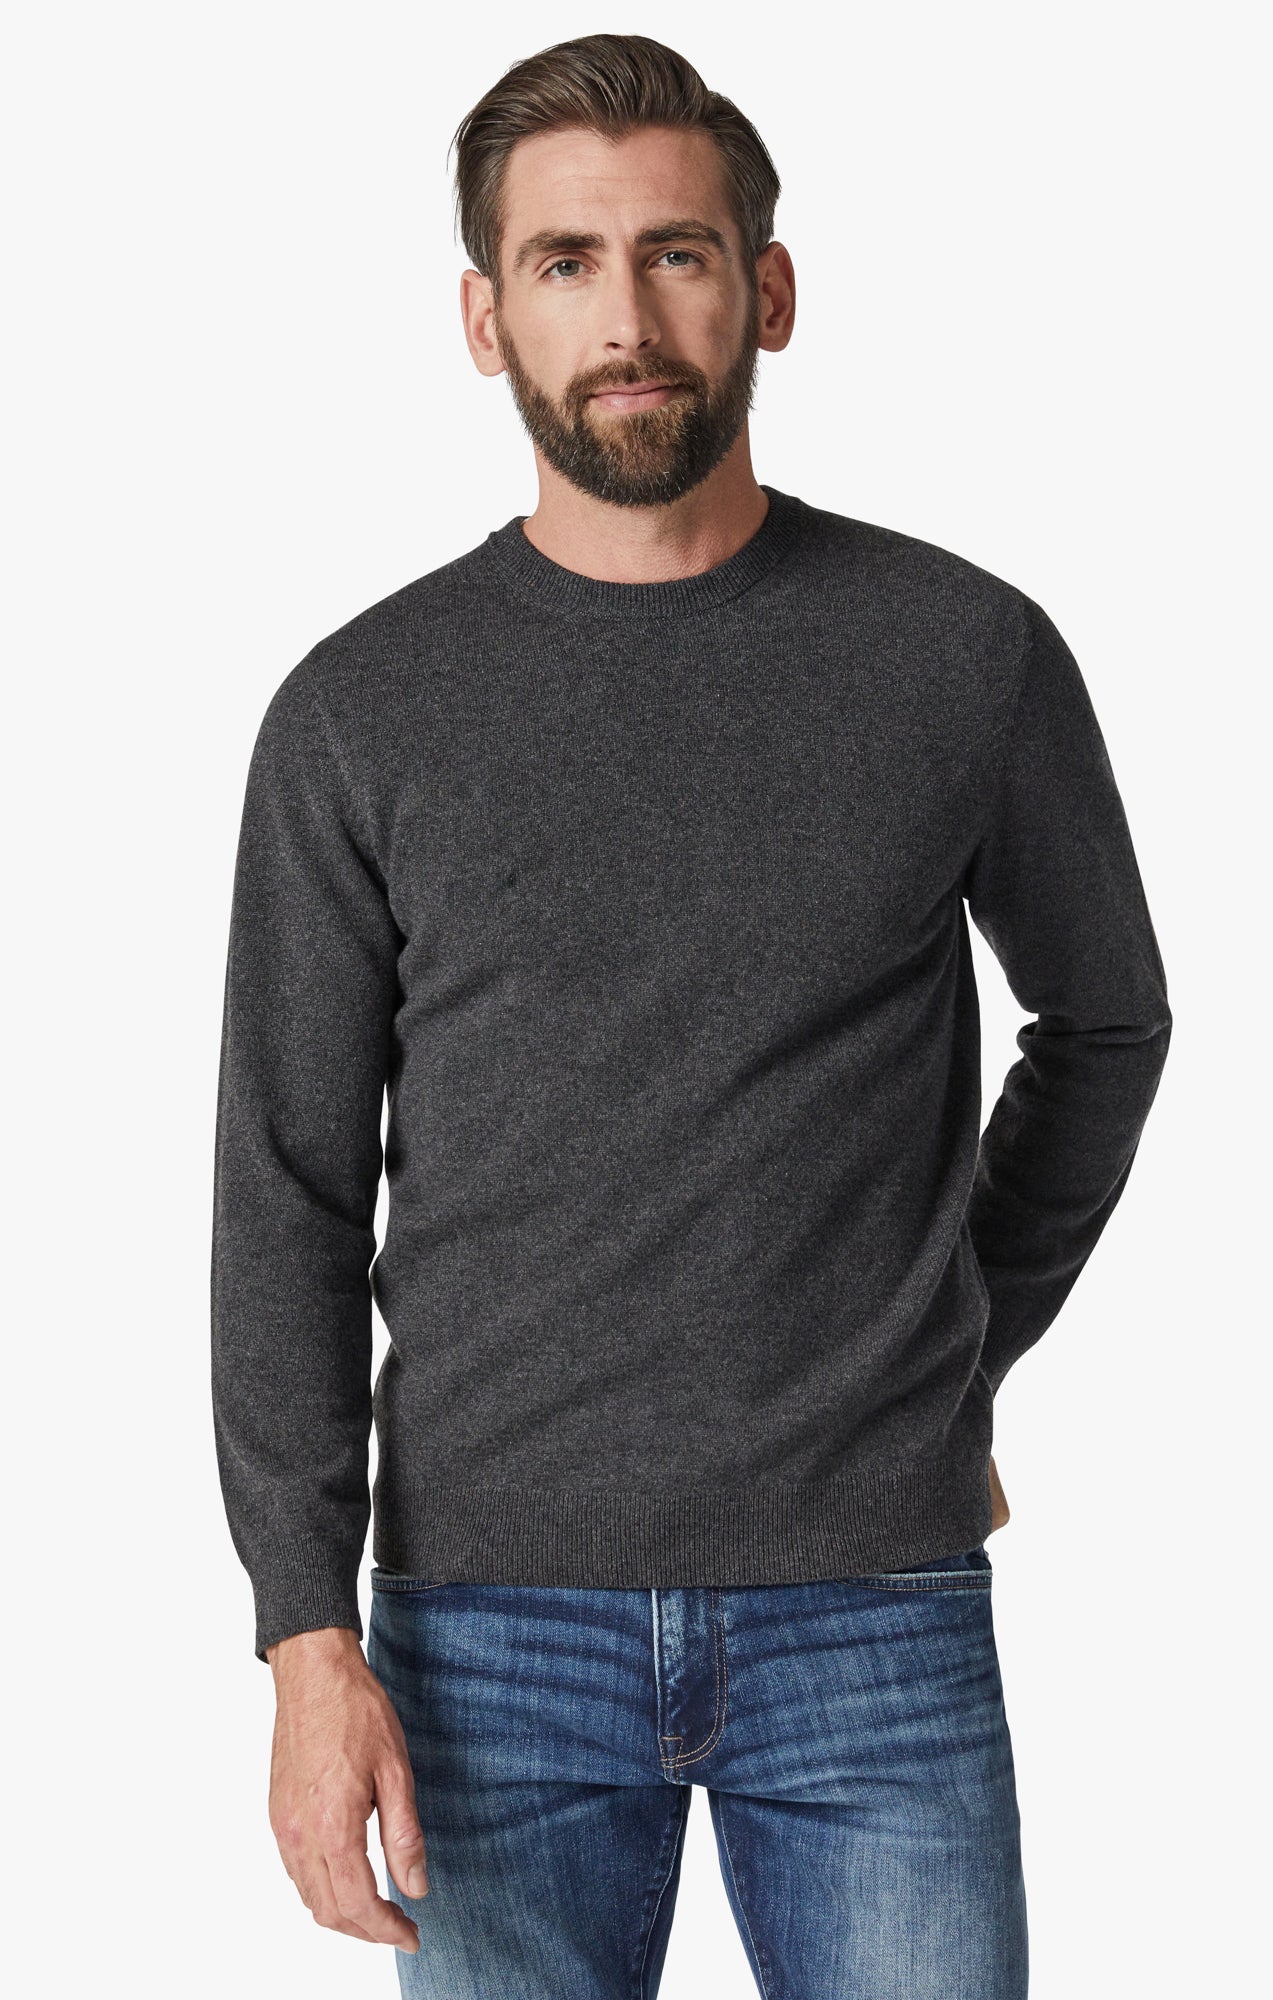 Cashmere Crew Neck Sweater In Charcoal Image 1